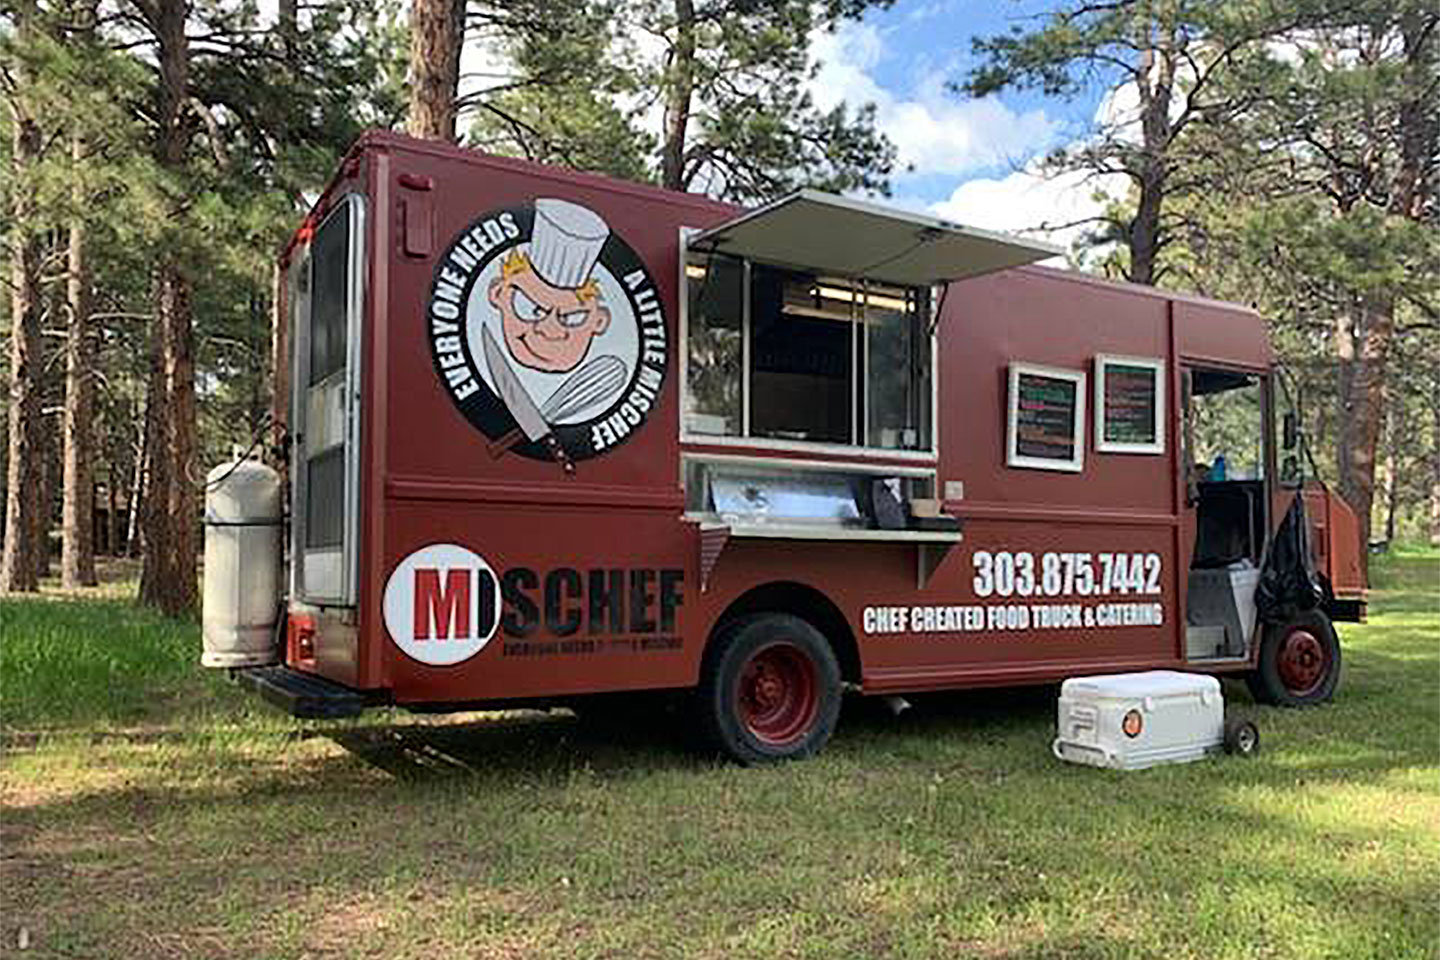 Unfortunately, Mischef is no longer in operation. Their last day of service was at one of of our events. We appreciate them for serving our neighbors and want to give them credit here on our page for their generosity.